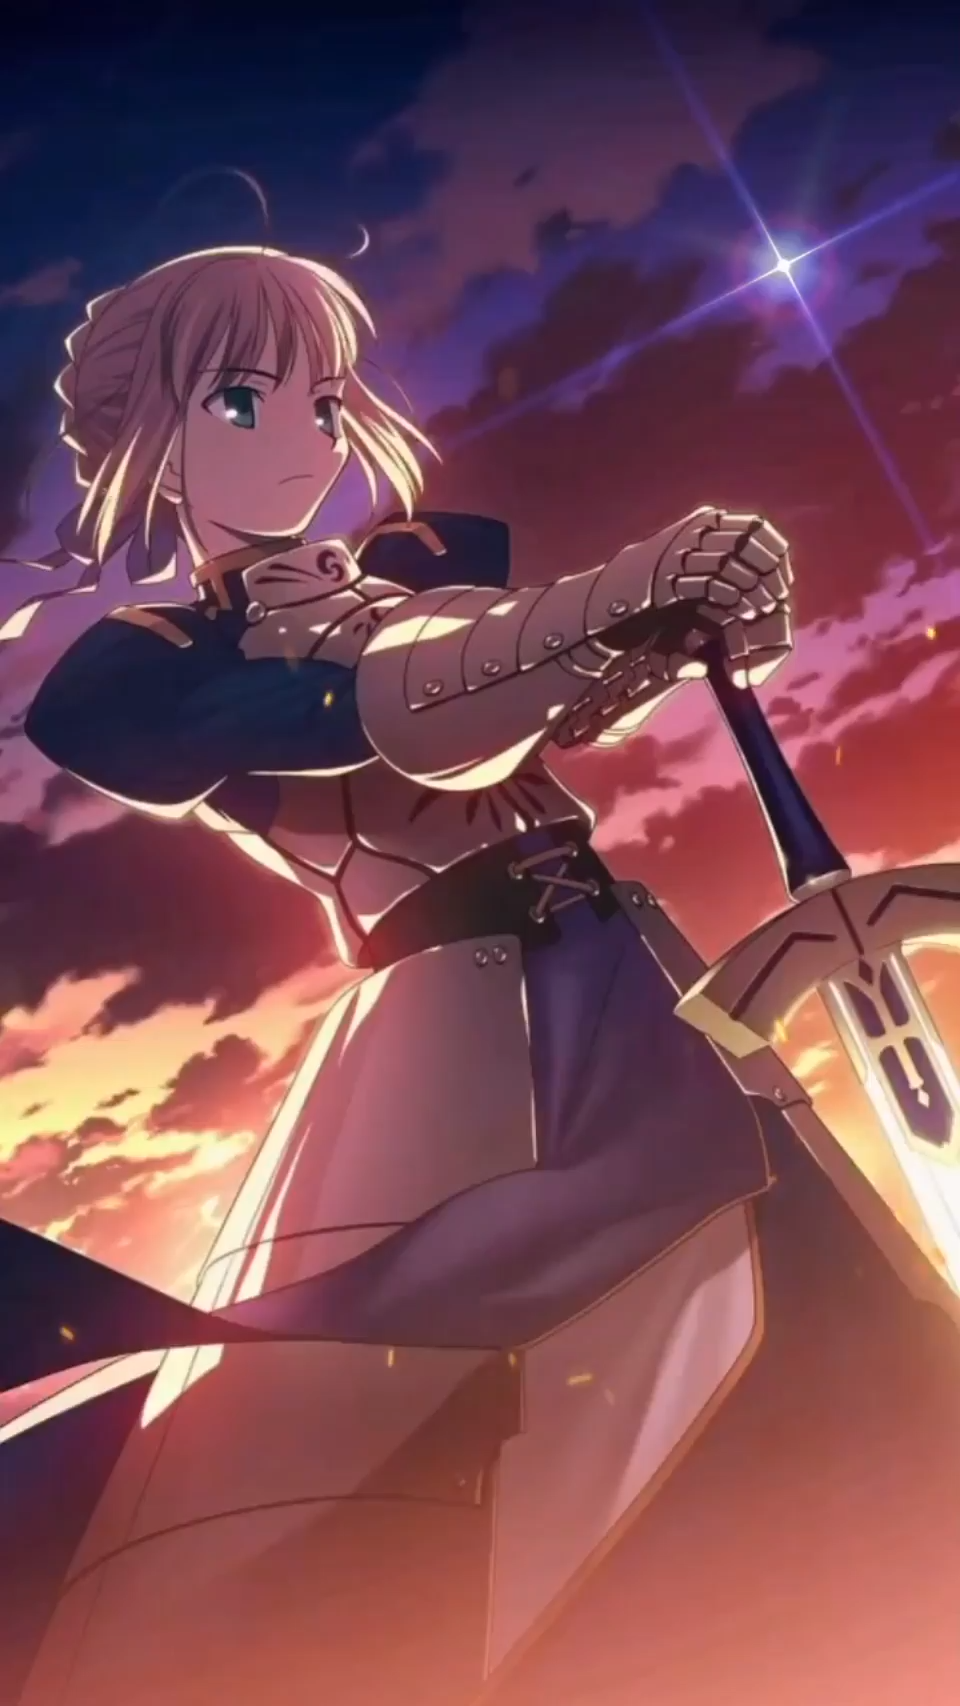 Saber Live Wallpaper Anime Fate Stay Night